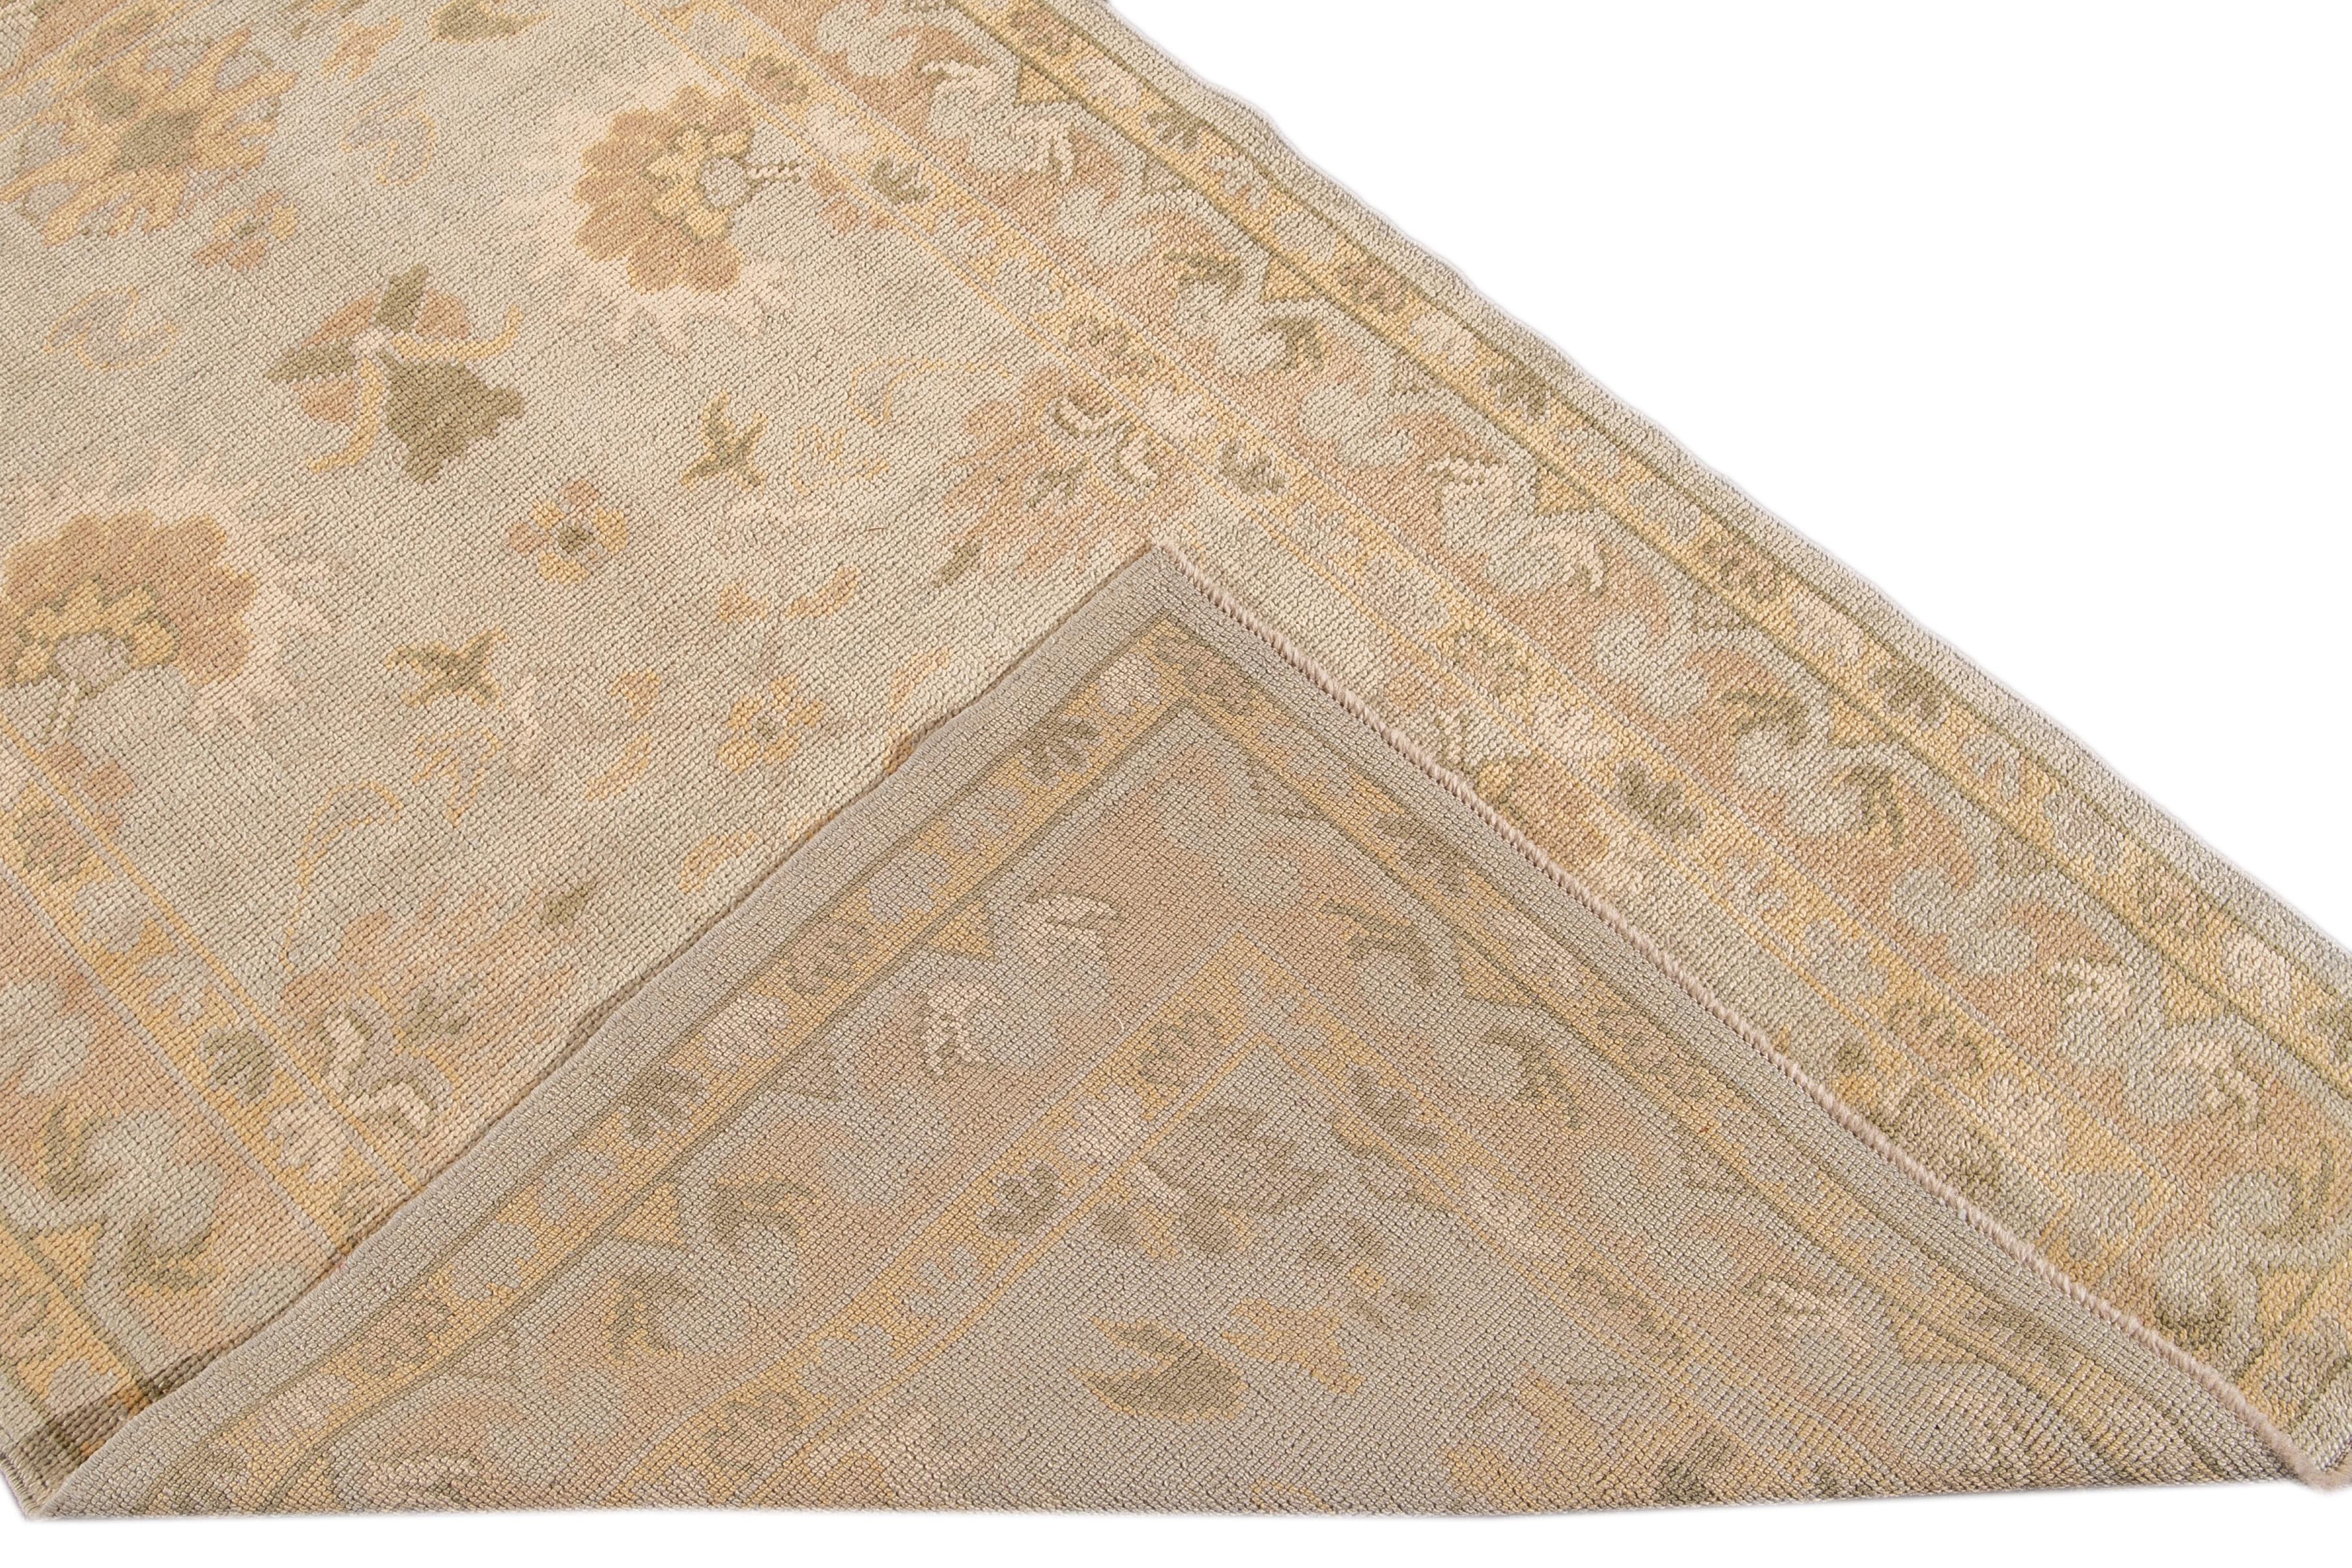 Beautiful Modern Turkish Oushak hand-knotted scatter wool rug with a gray field. This Oushak has accents and a frame of yellow, tan, and green in an all-over geometric floral design.

This Rug measures: 3'9